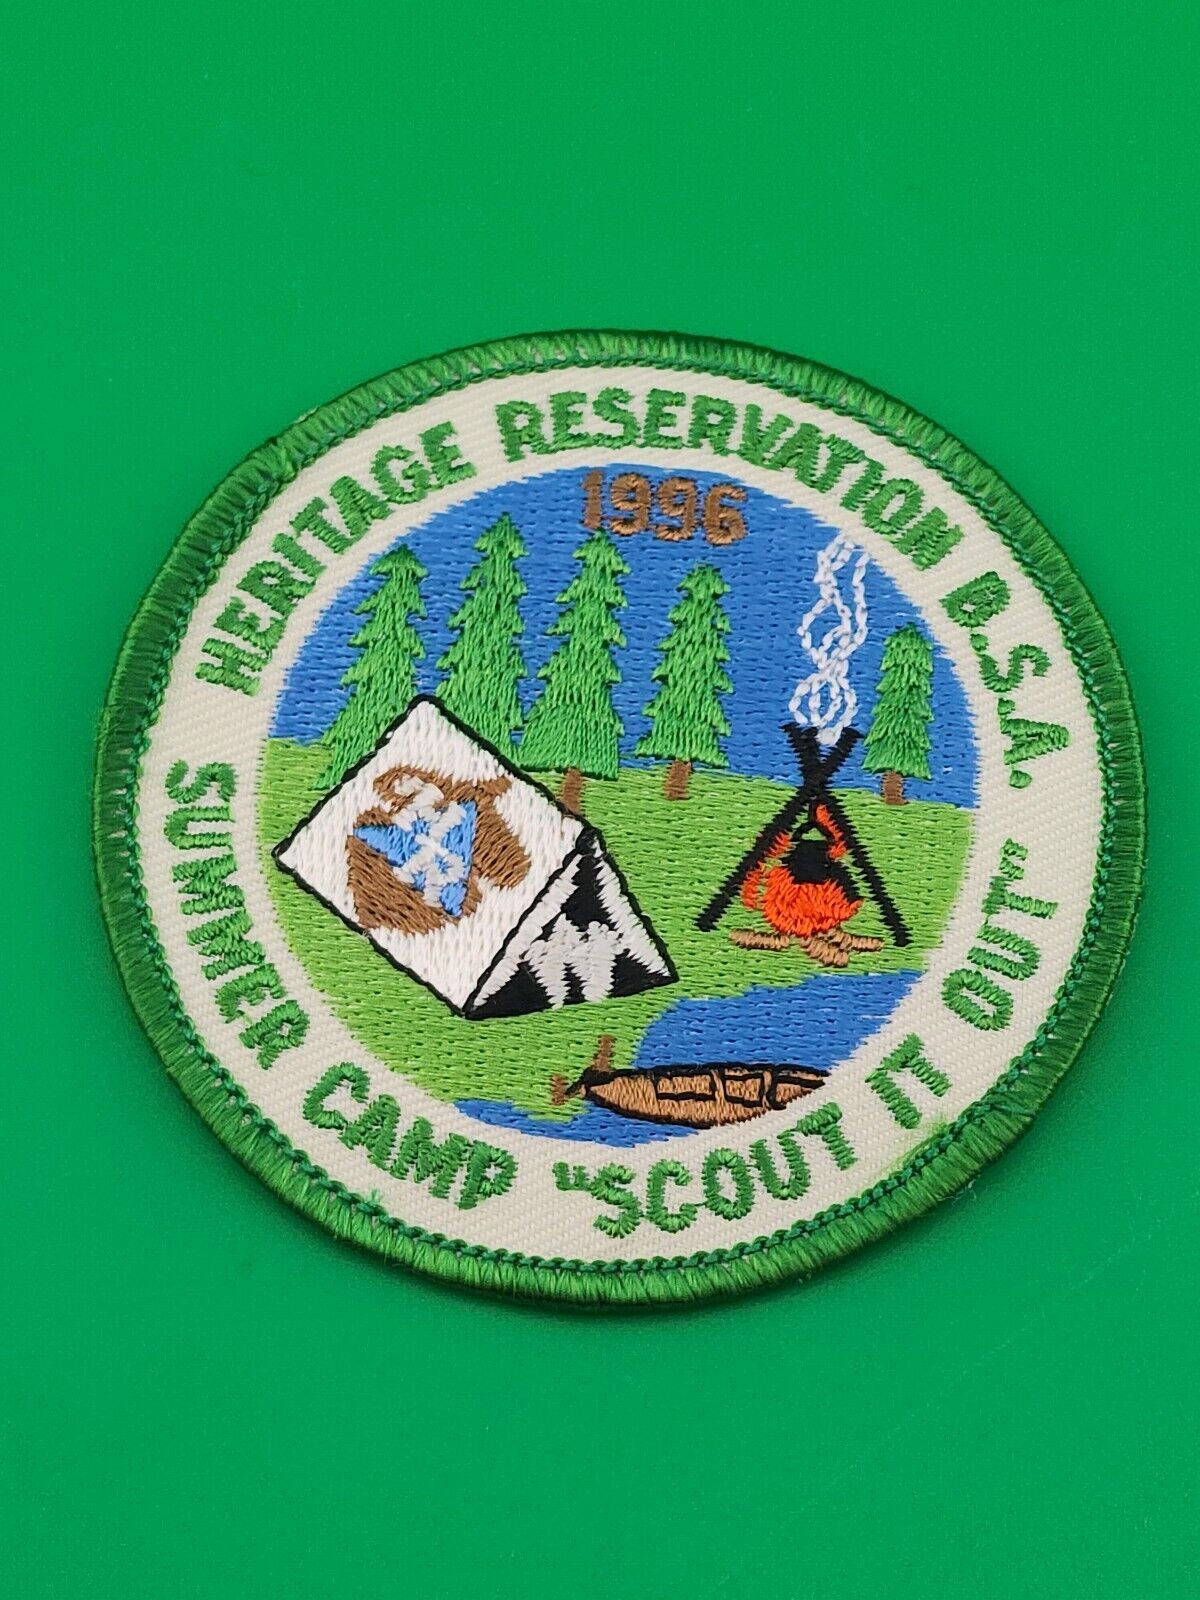 Heritage Reservation BSA Summer Camp 1996  Scout It Out Patch Boy Scouts NEW